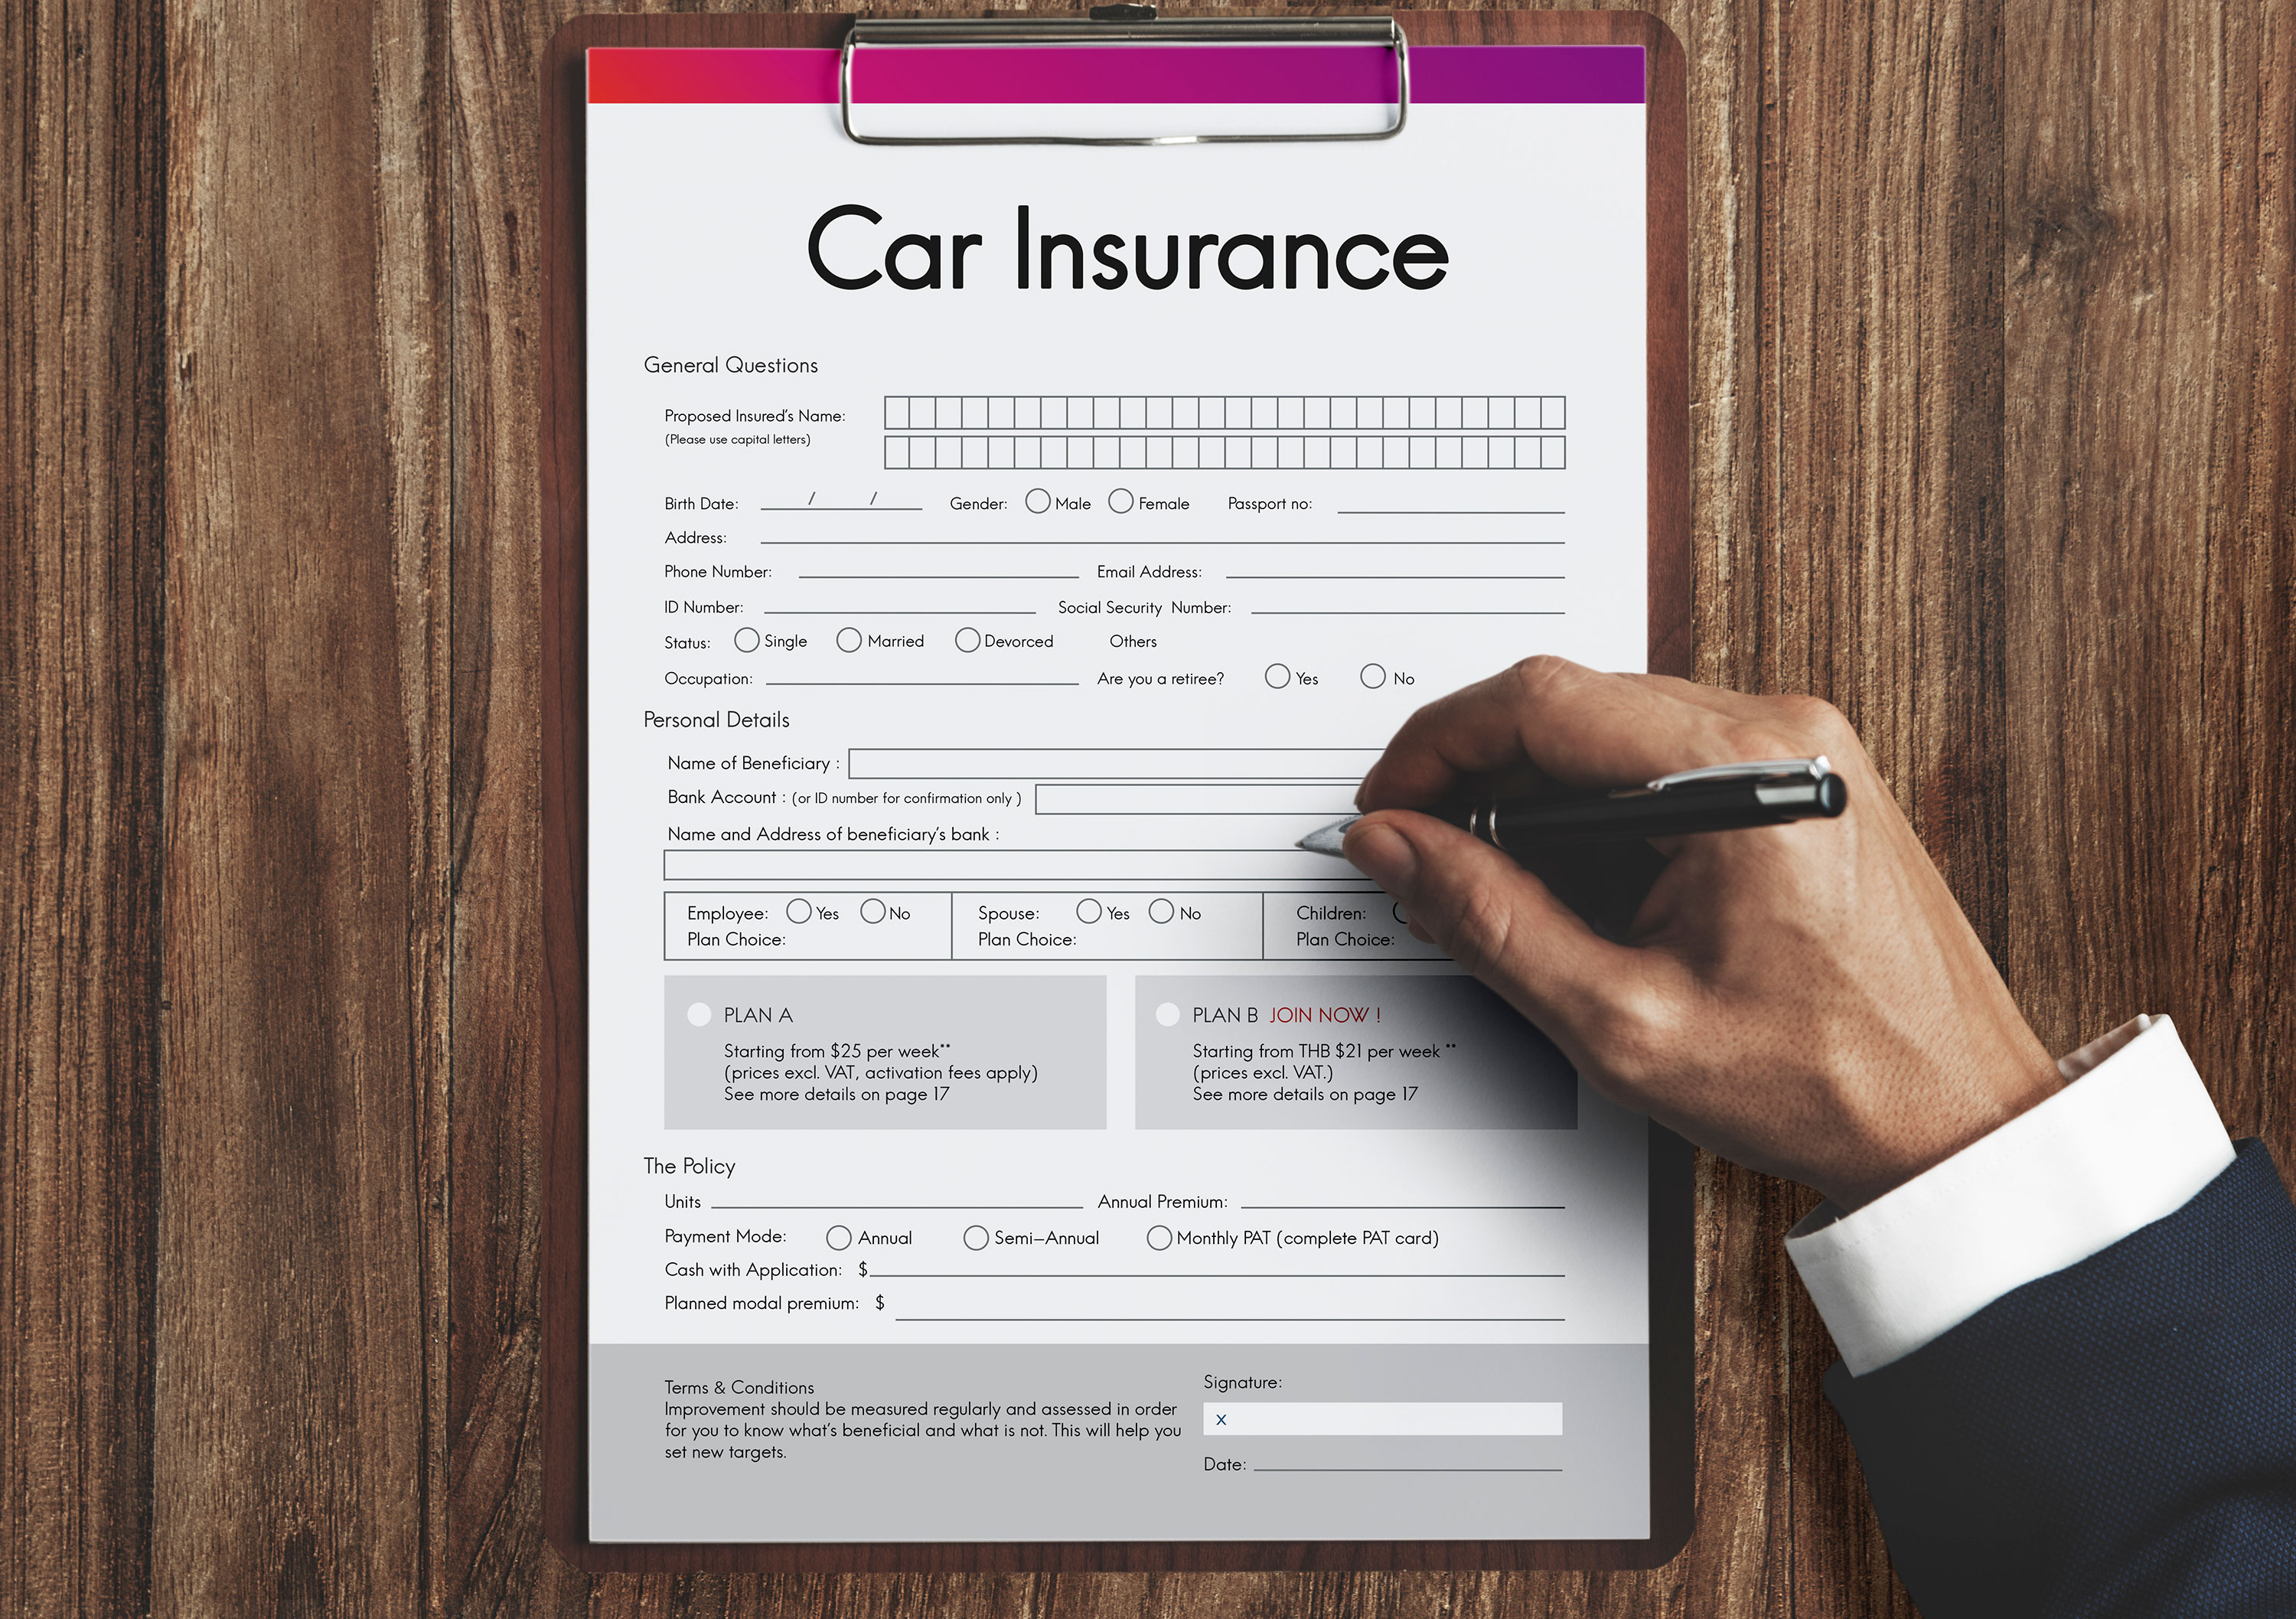 What if you miss car insurance policy renewal?